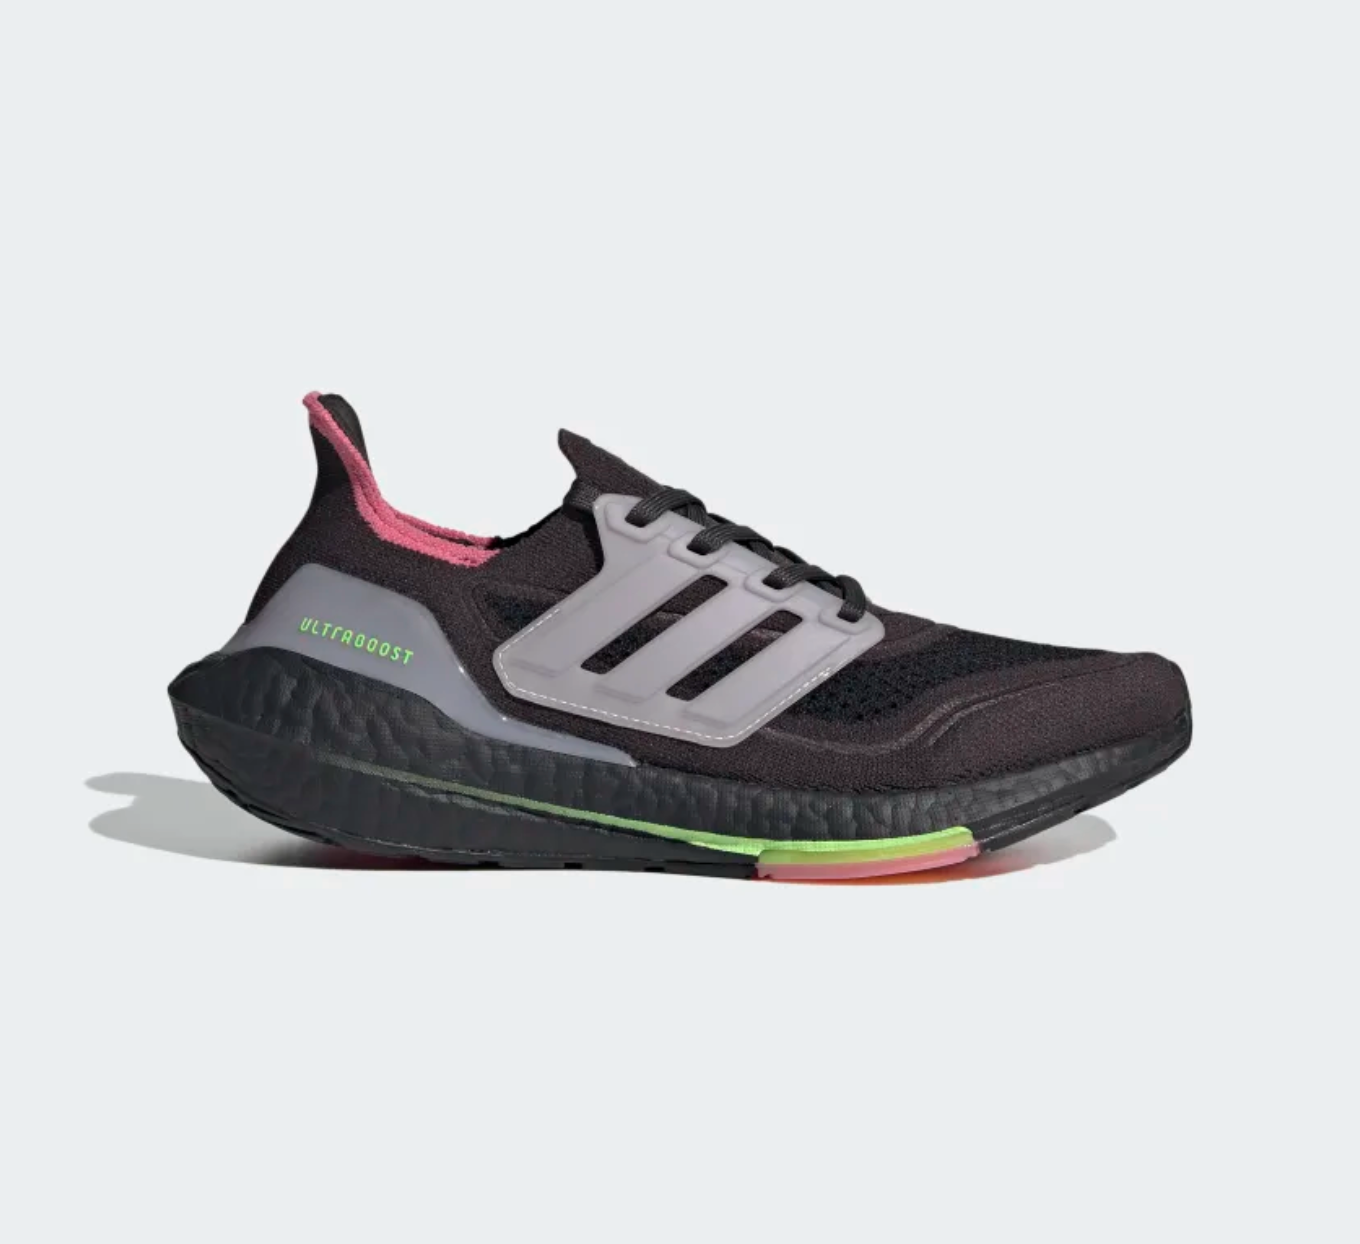 Fabricante África Optimismo Adidas Ultraboost Running Shoes Are on Sale for 50% Off Right Now |  Entertainment Tonight